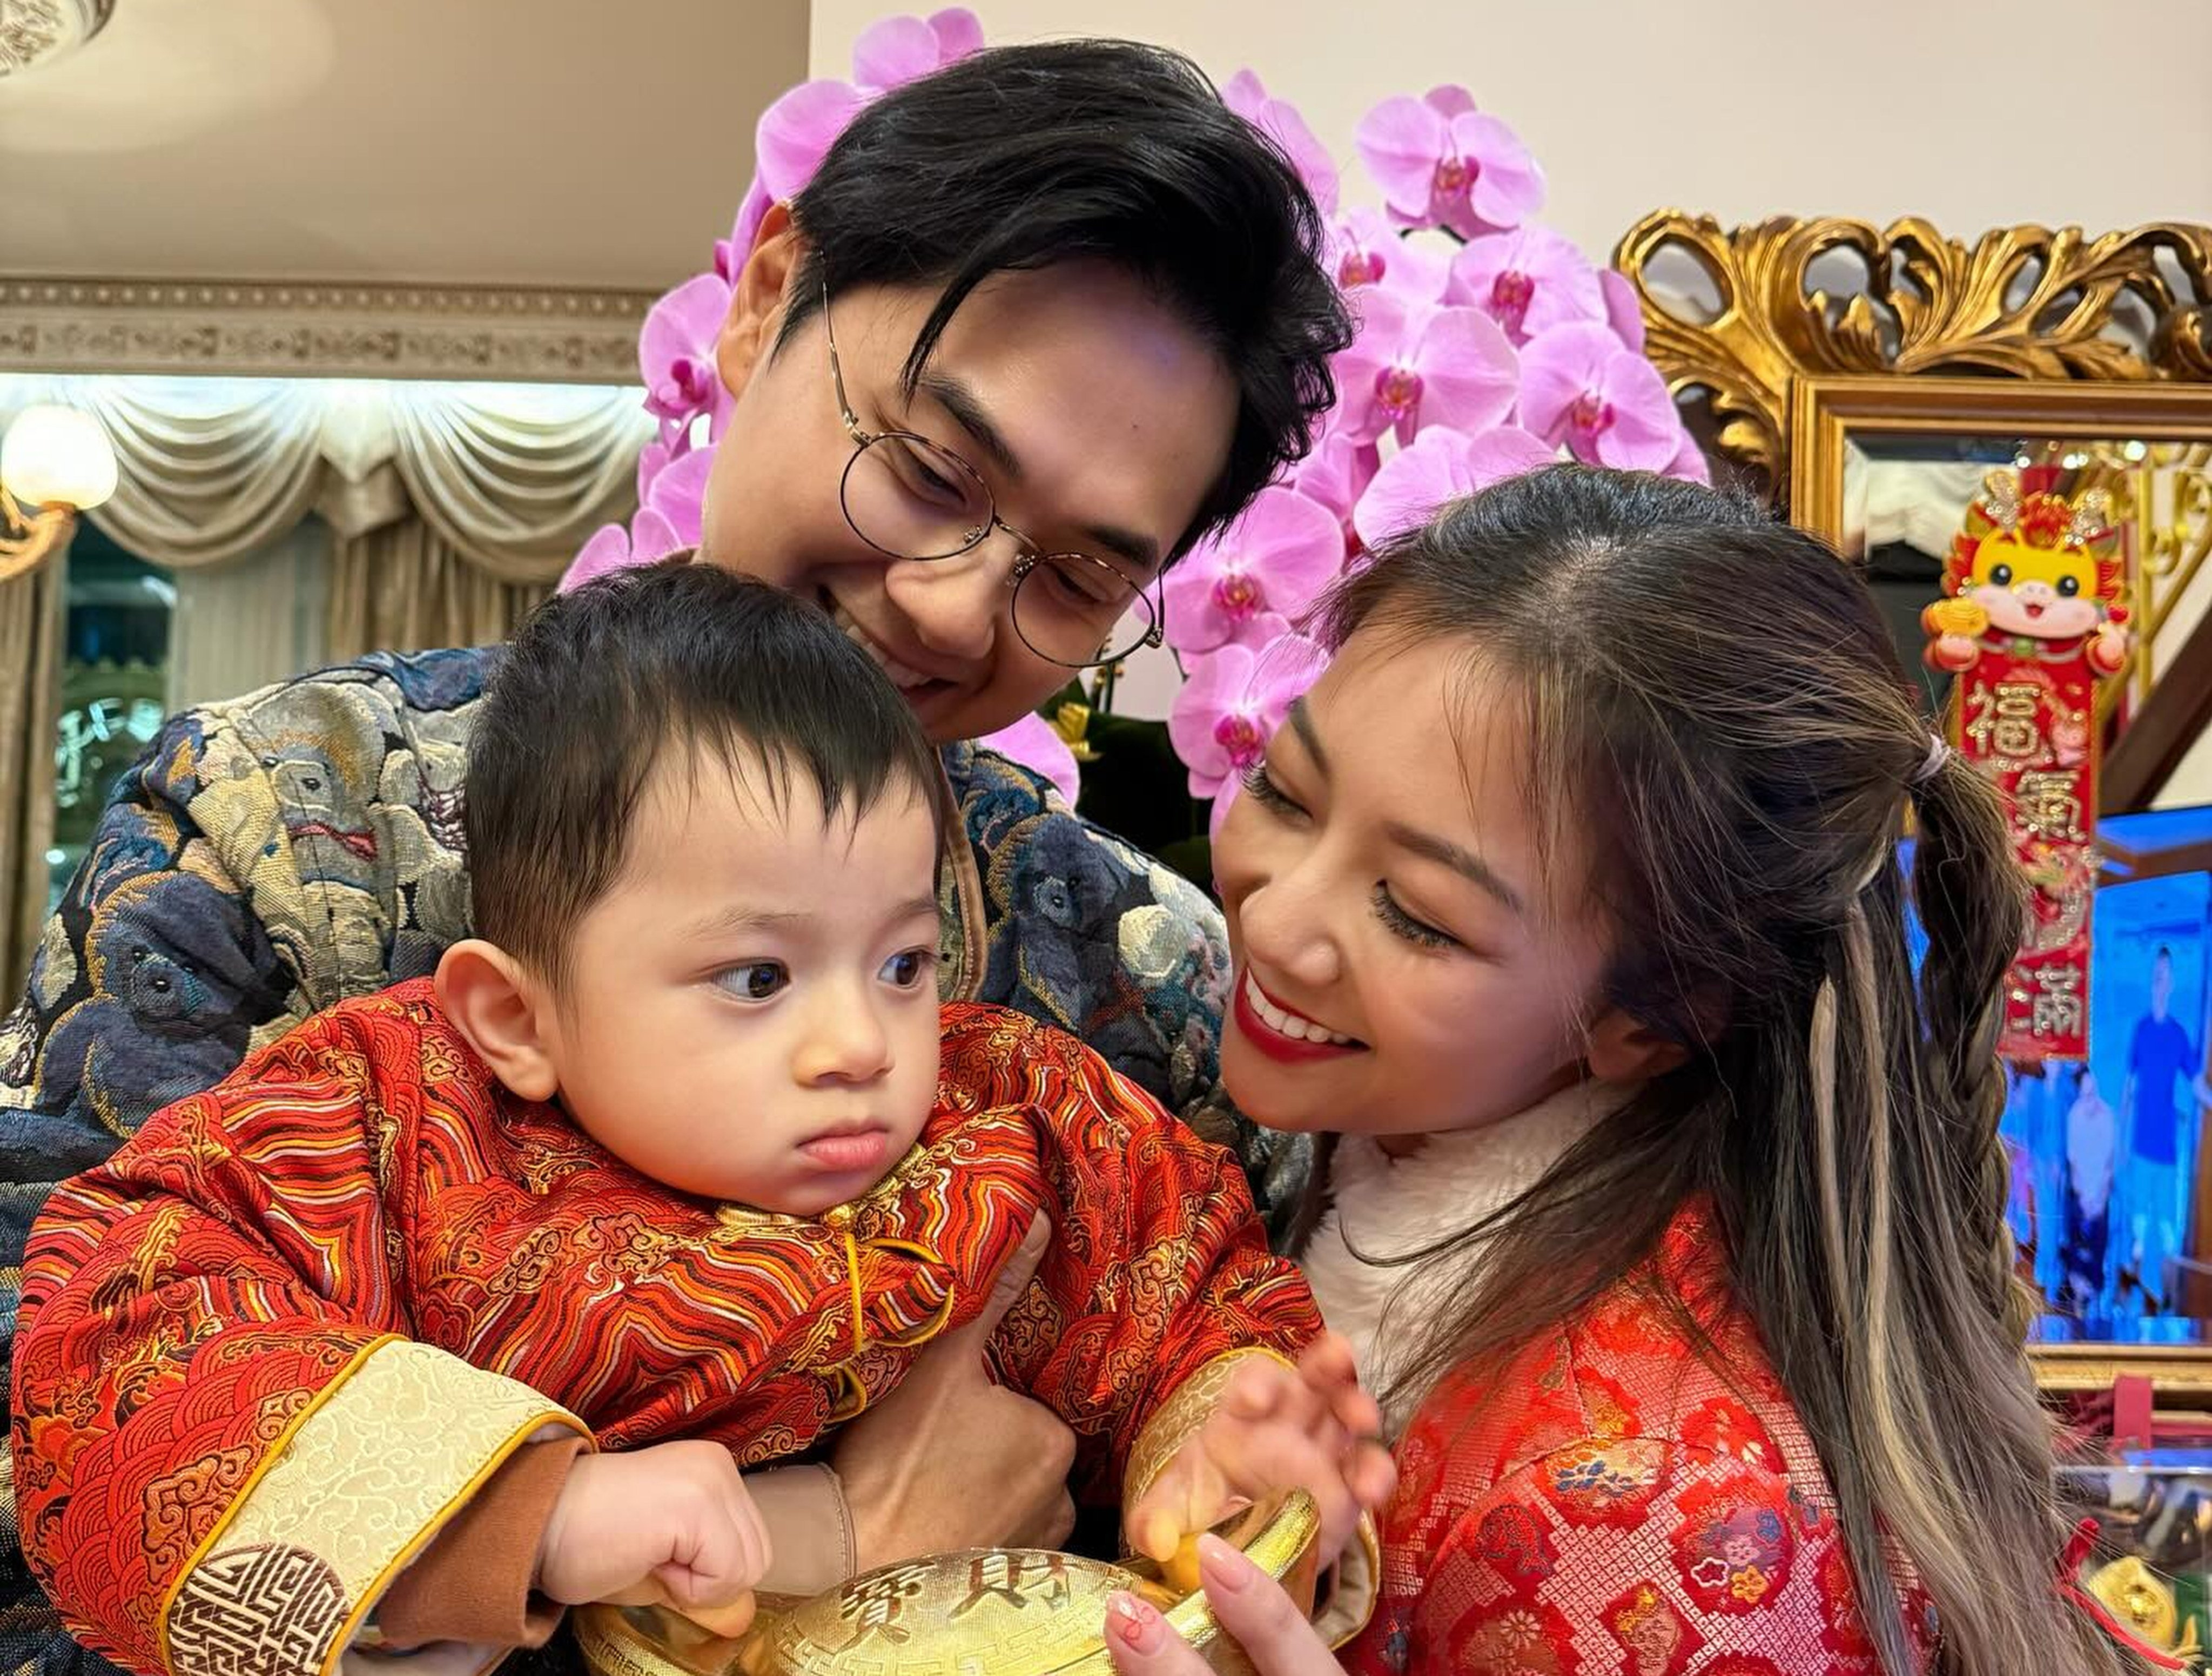 Hong Kong star couple Stephanie Ho and Fred Cheng with their son Asher. Photo: Facebook/Stephanie Ho